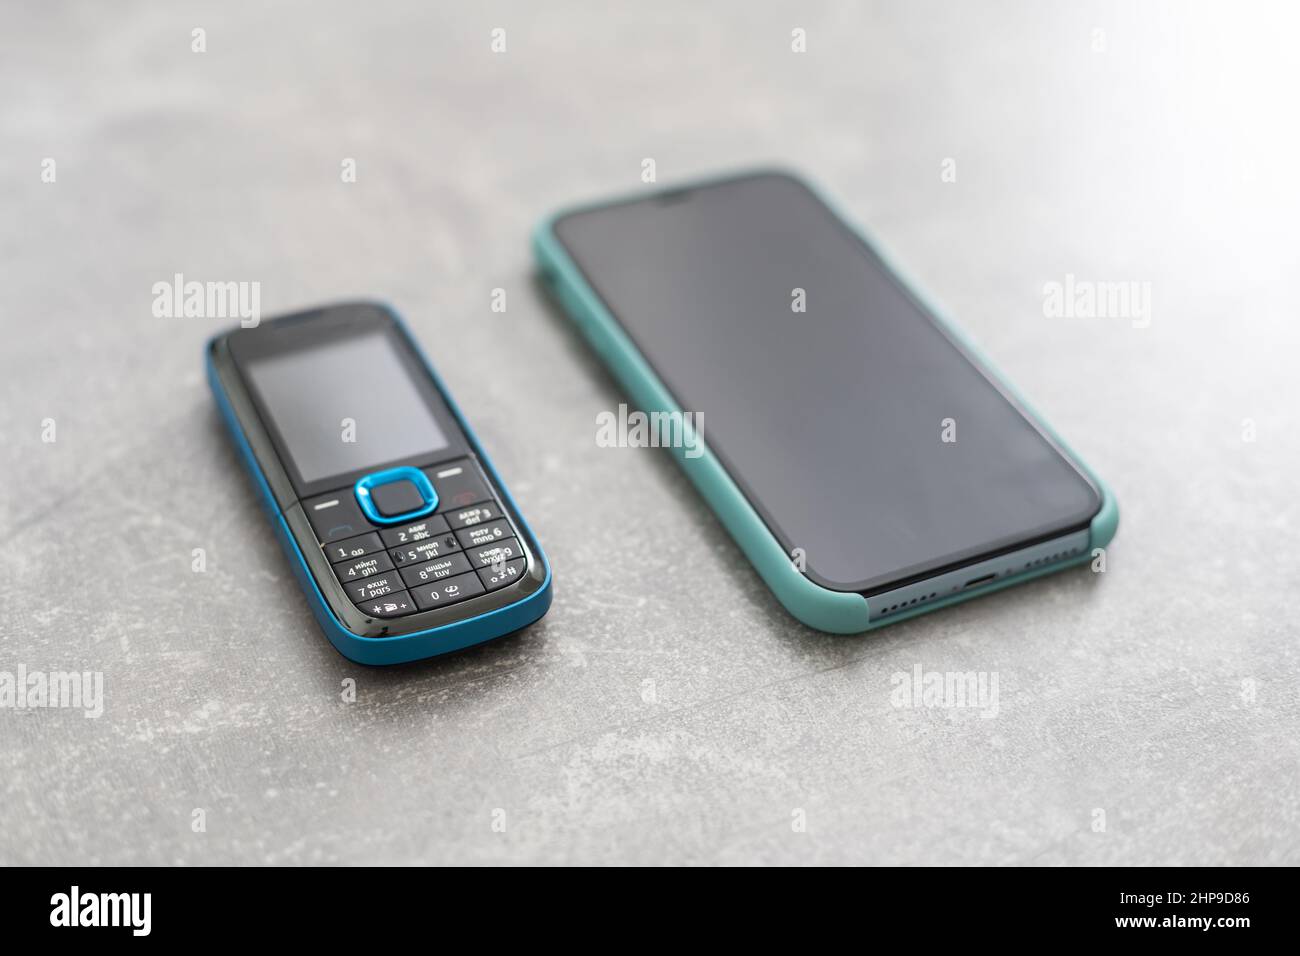 old feature phone with new smartphone Stock Photo